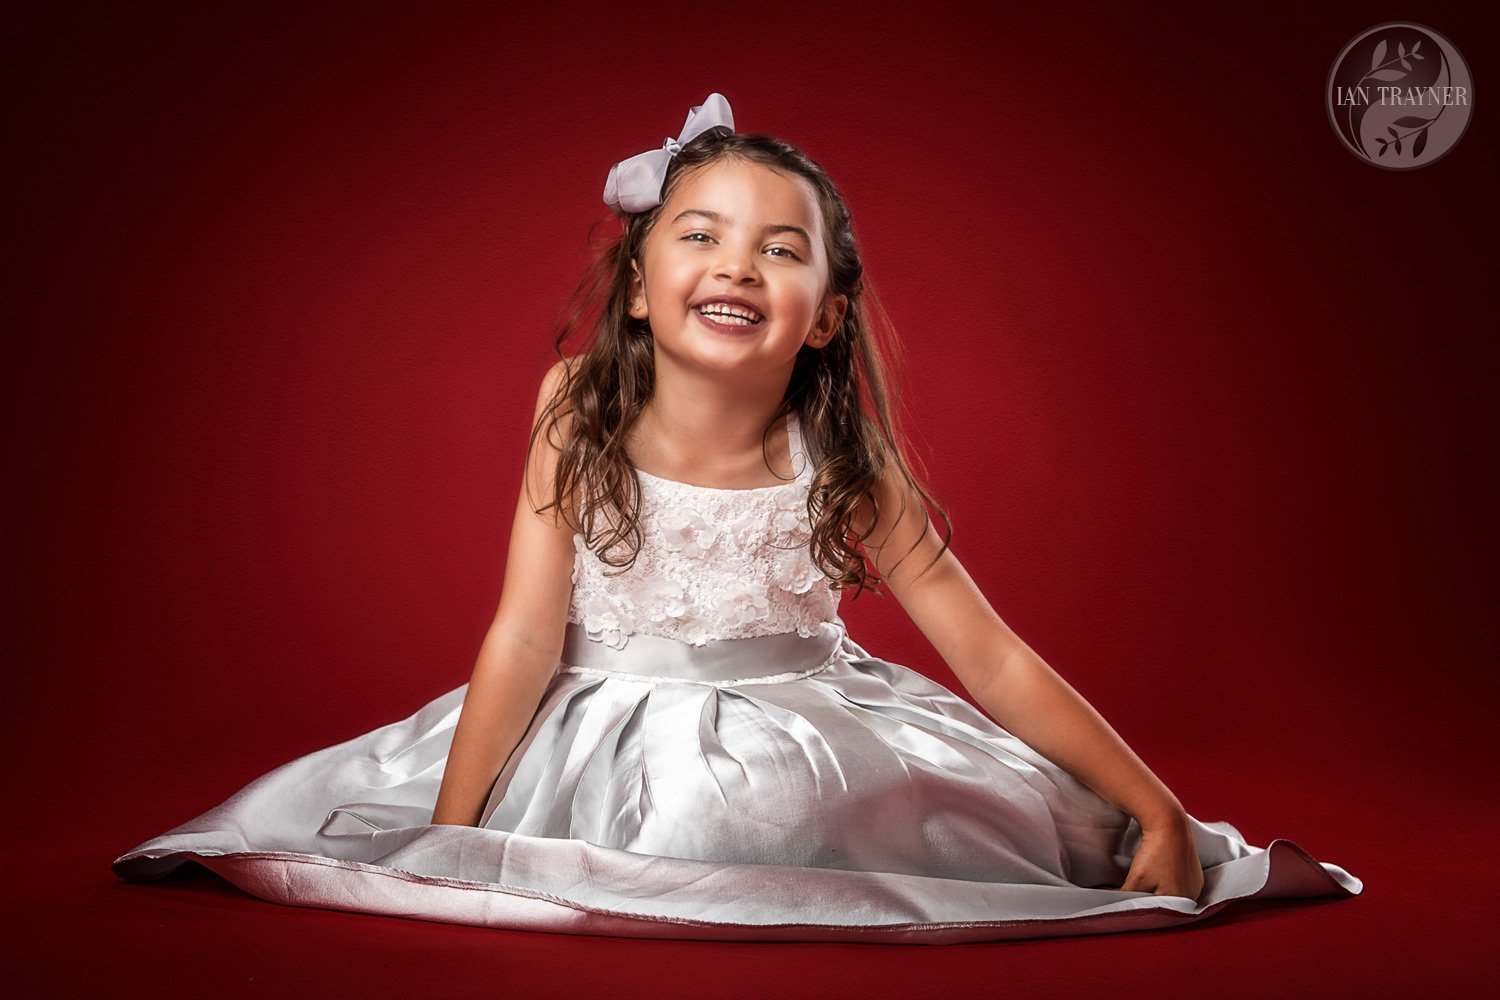 Very cute girl photographed in the studio. Family photography by Ian Trayner